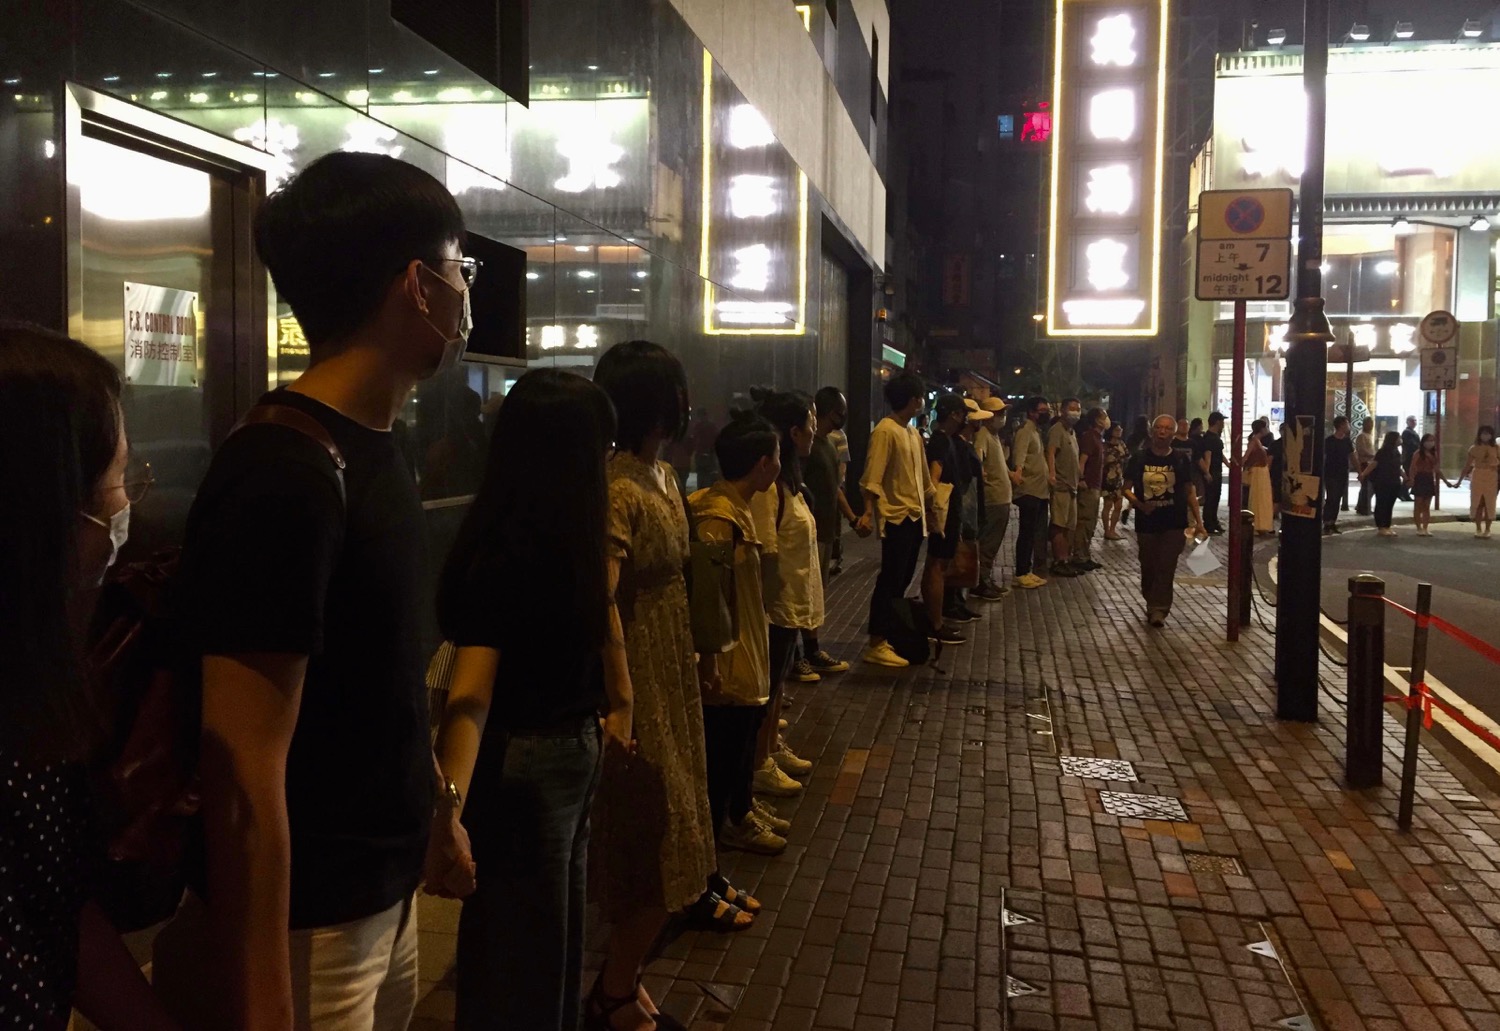 Protesters joined hands across Hong Kong tonight to express their continued support for the city’s long-running protest movement. Photo by Stuart White.